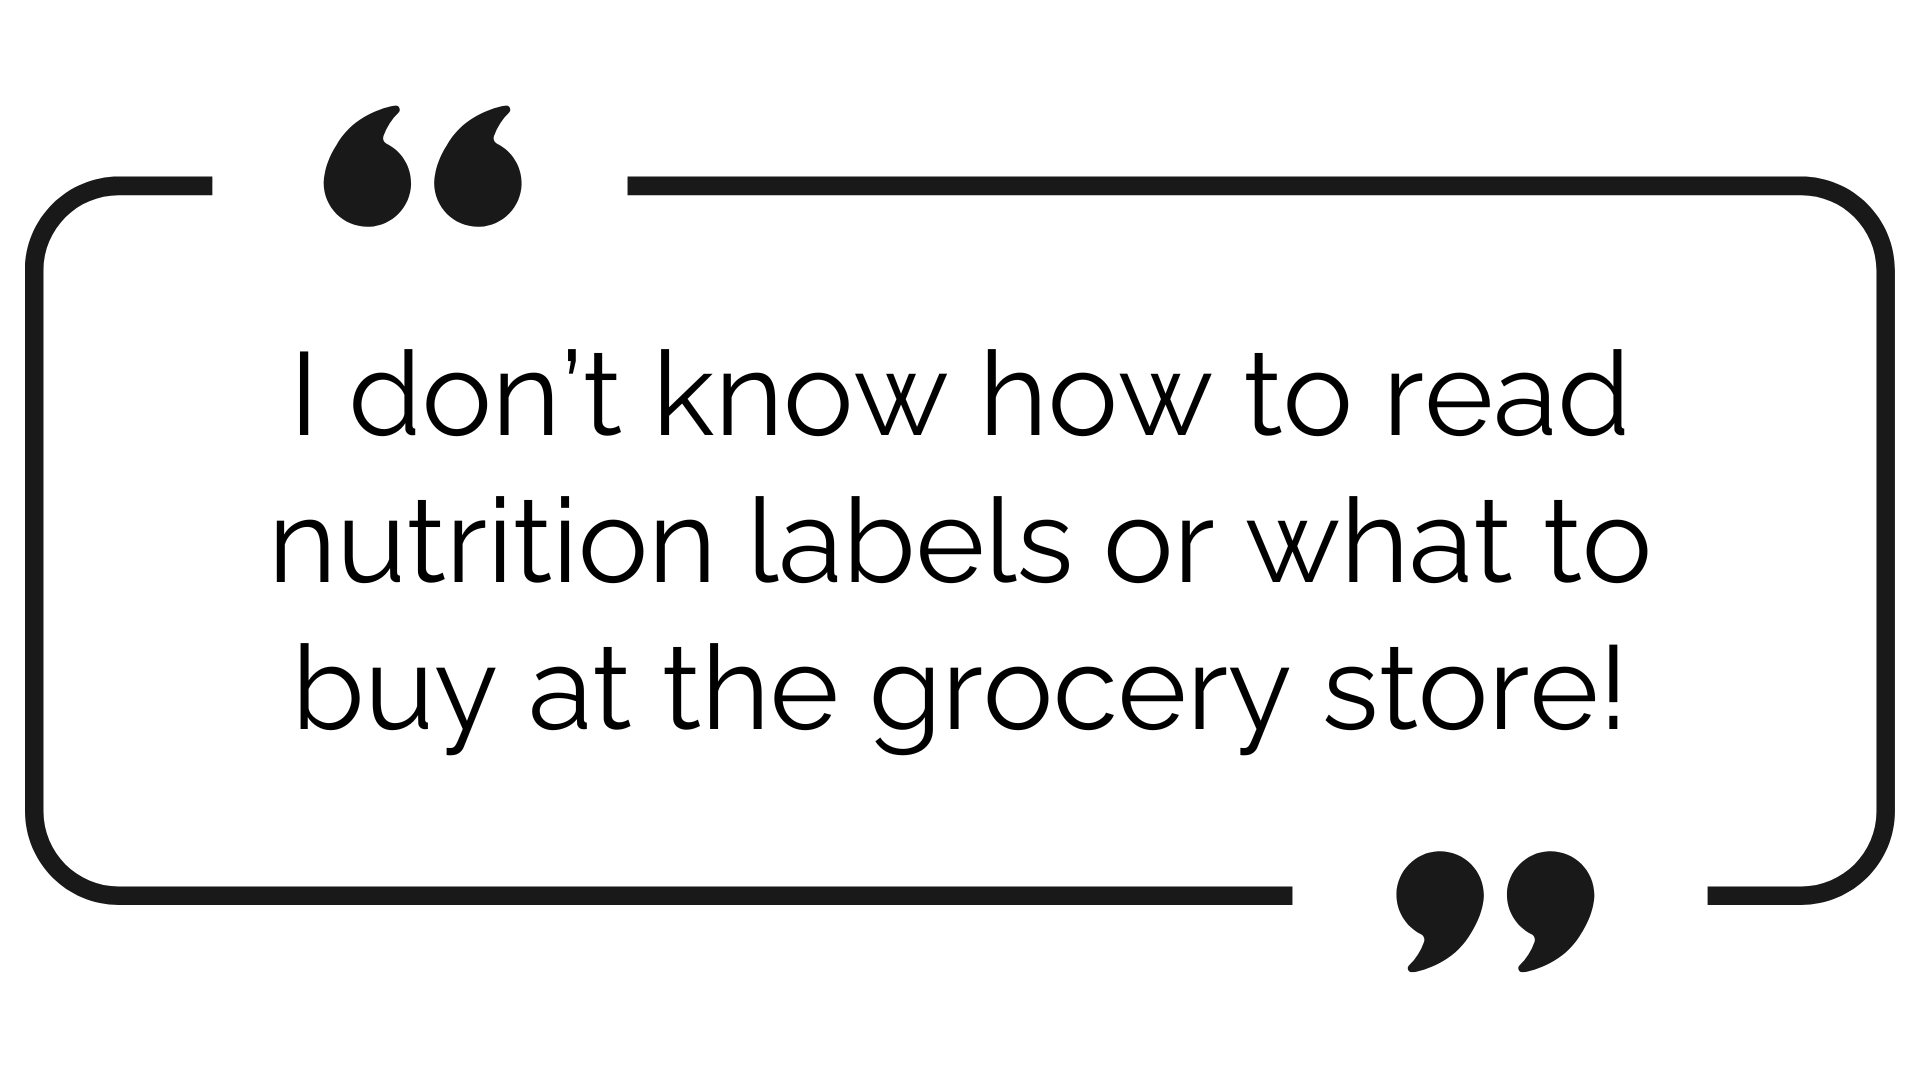 I don't know how to read nutrition labels